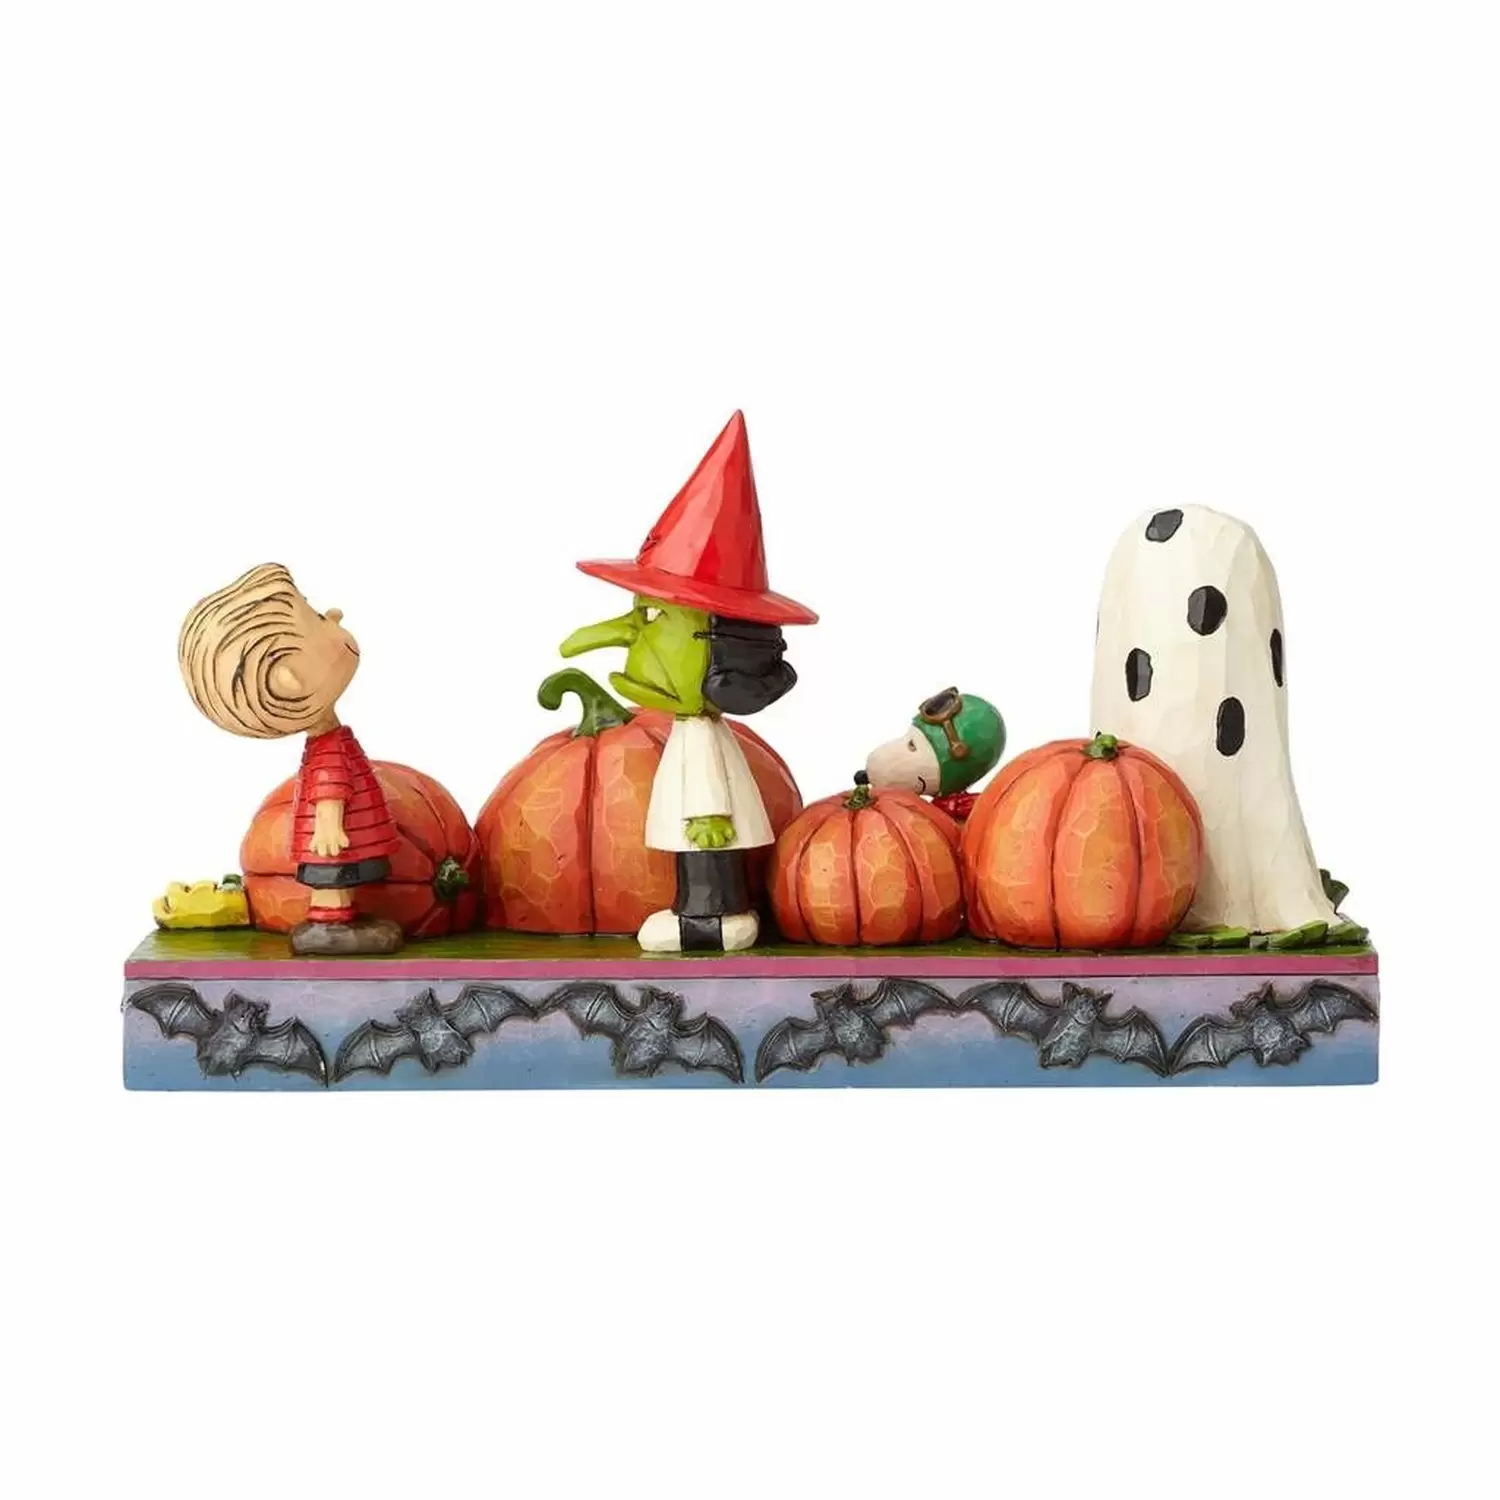 Peanuts - Jim Shore - Each Year, the Great Pumpkin Rises - Charlie Brown, Snoopy, Linus, and Lucy Pumpkin Patch